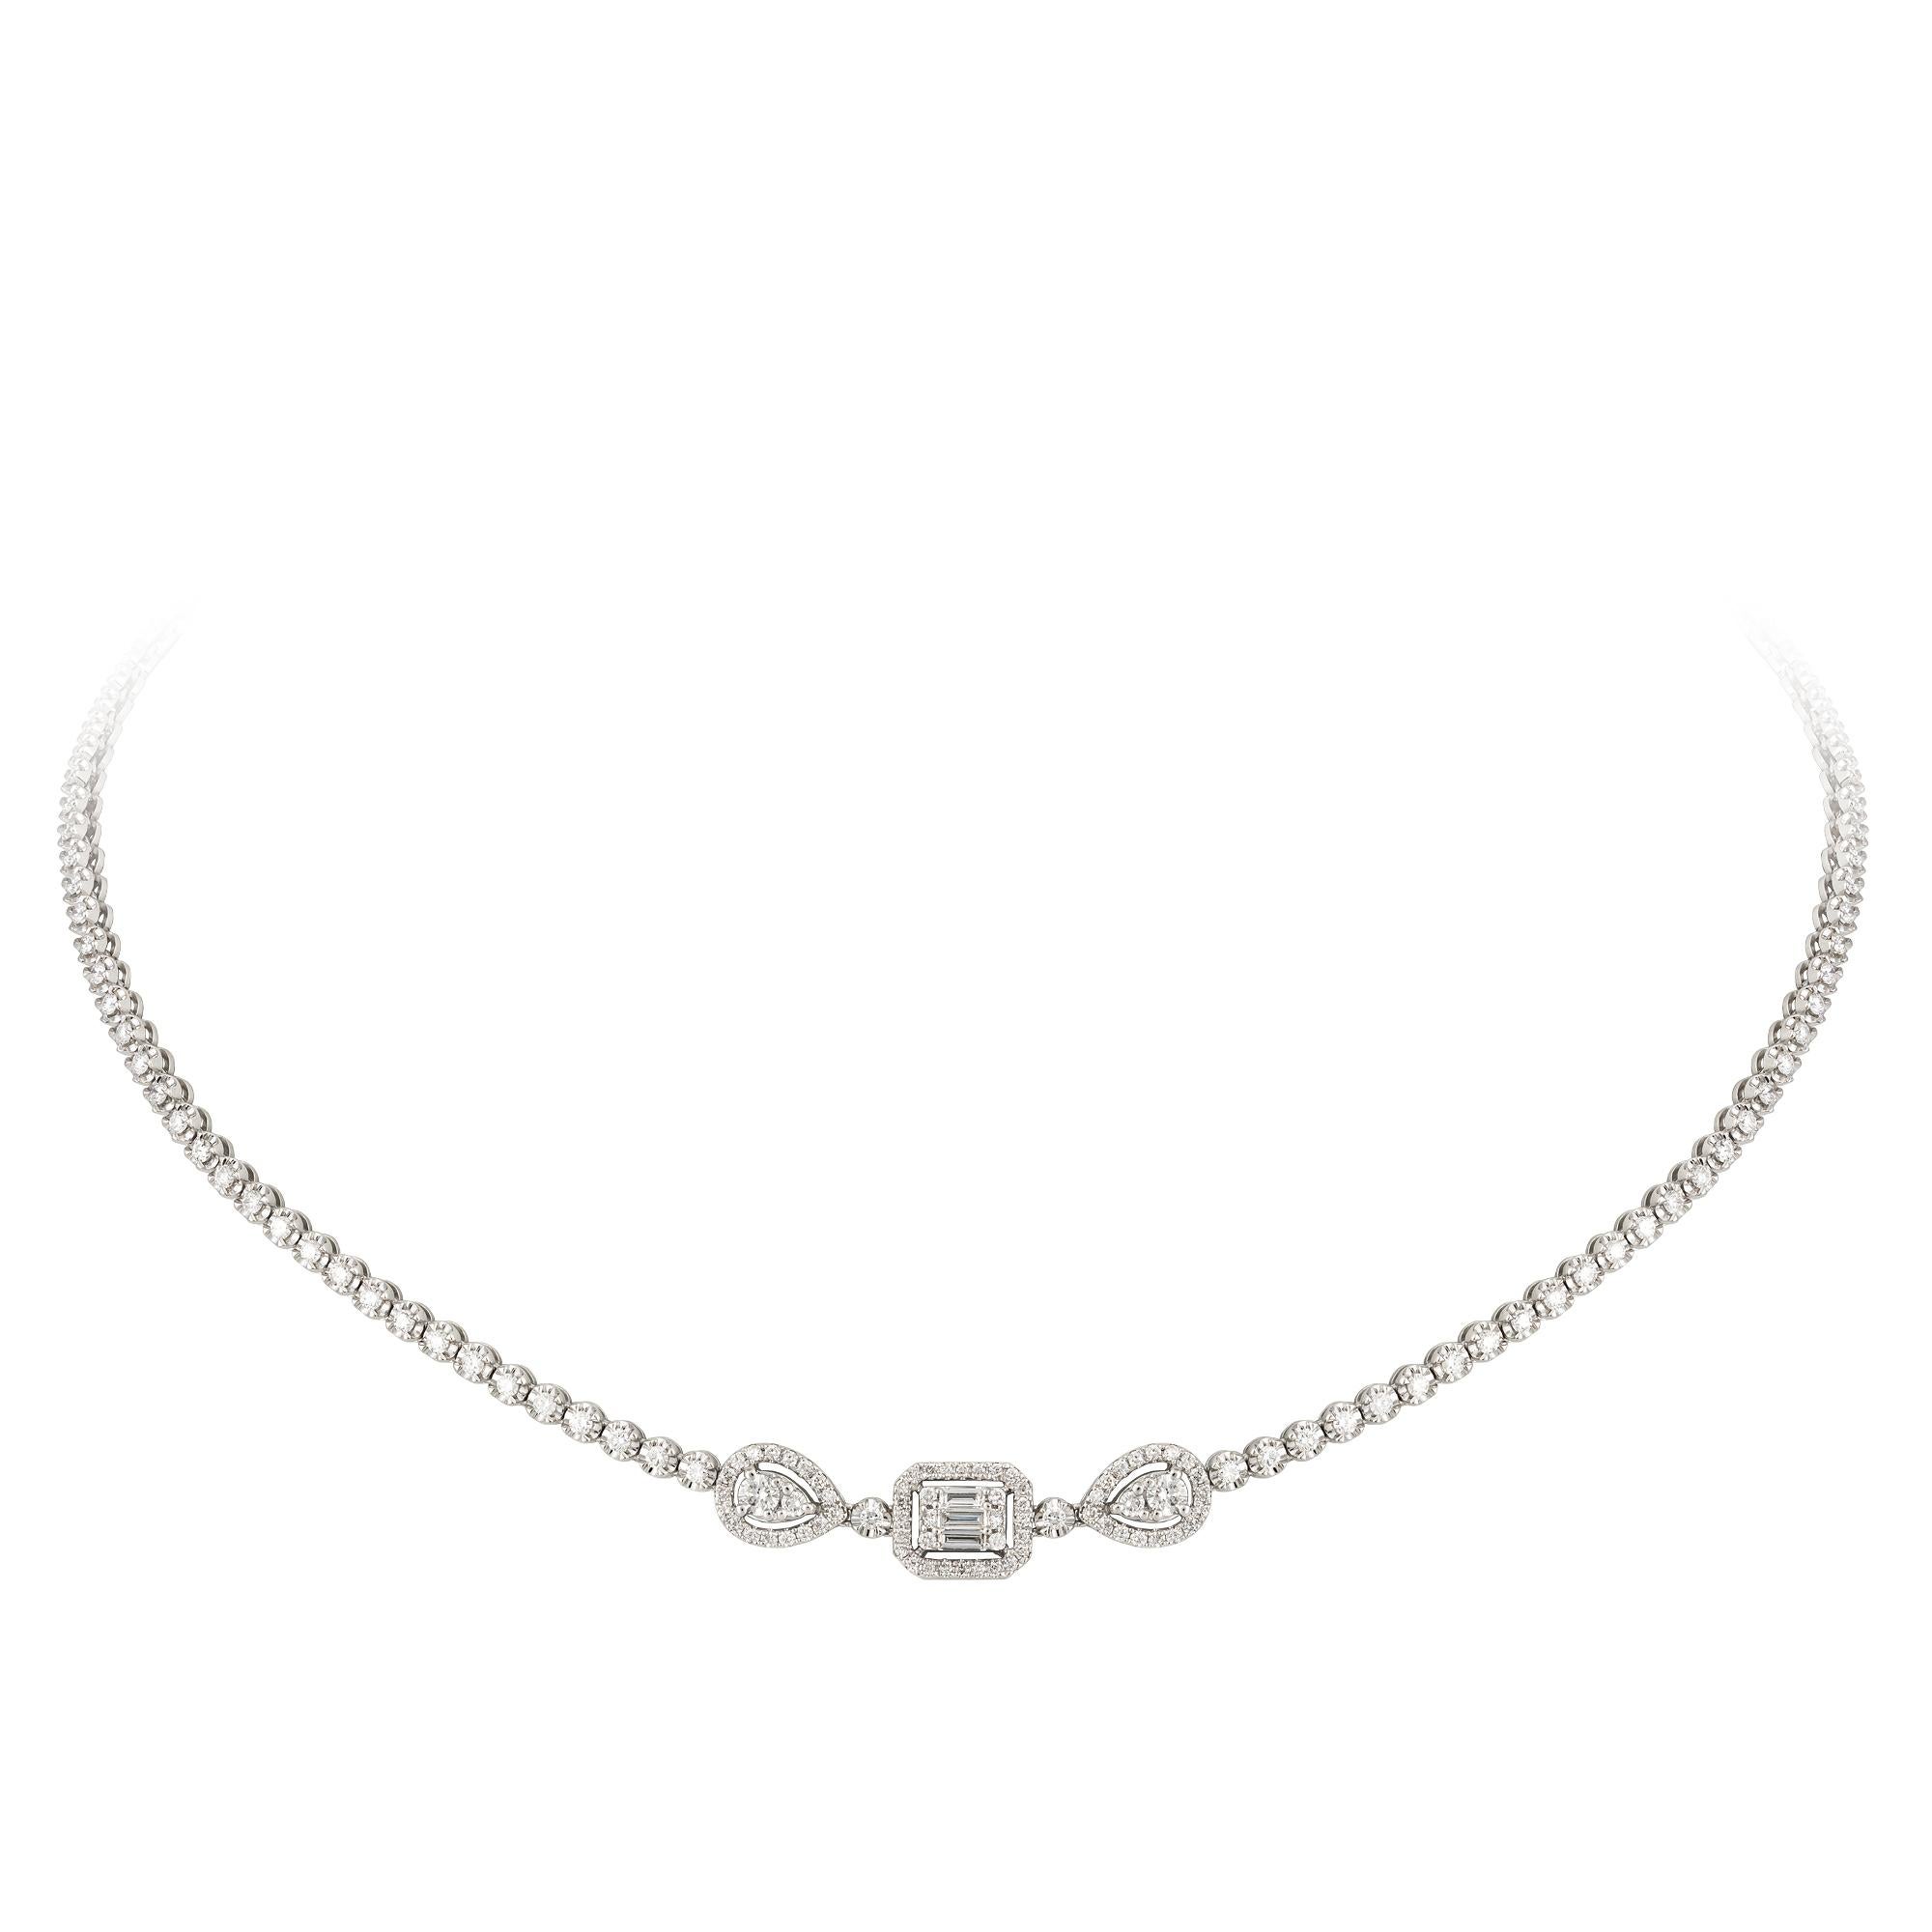 Antique Cushion Cut Classic Diamond 18 Karat White Gold Necklace for Her For Sale